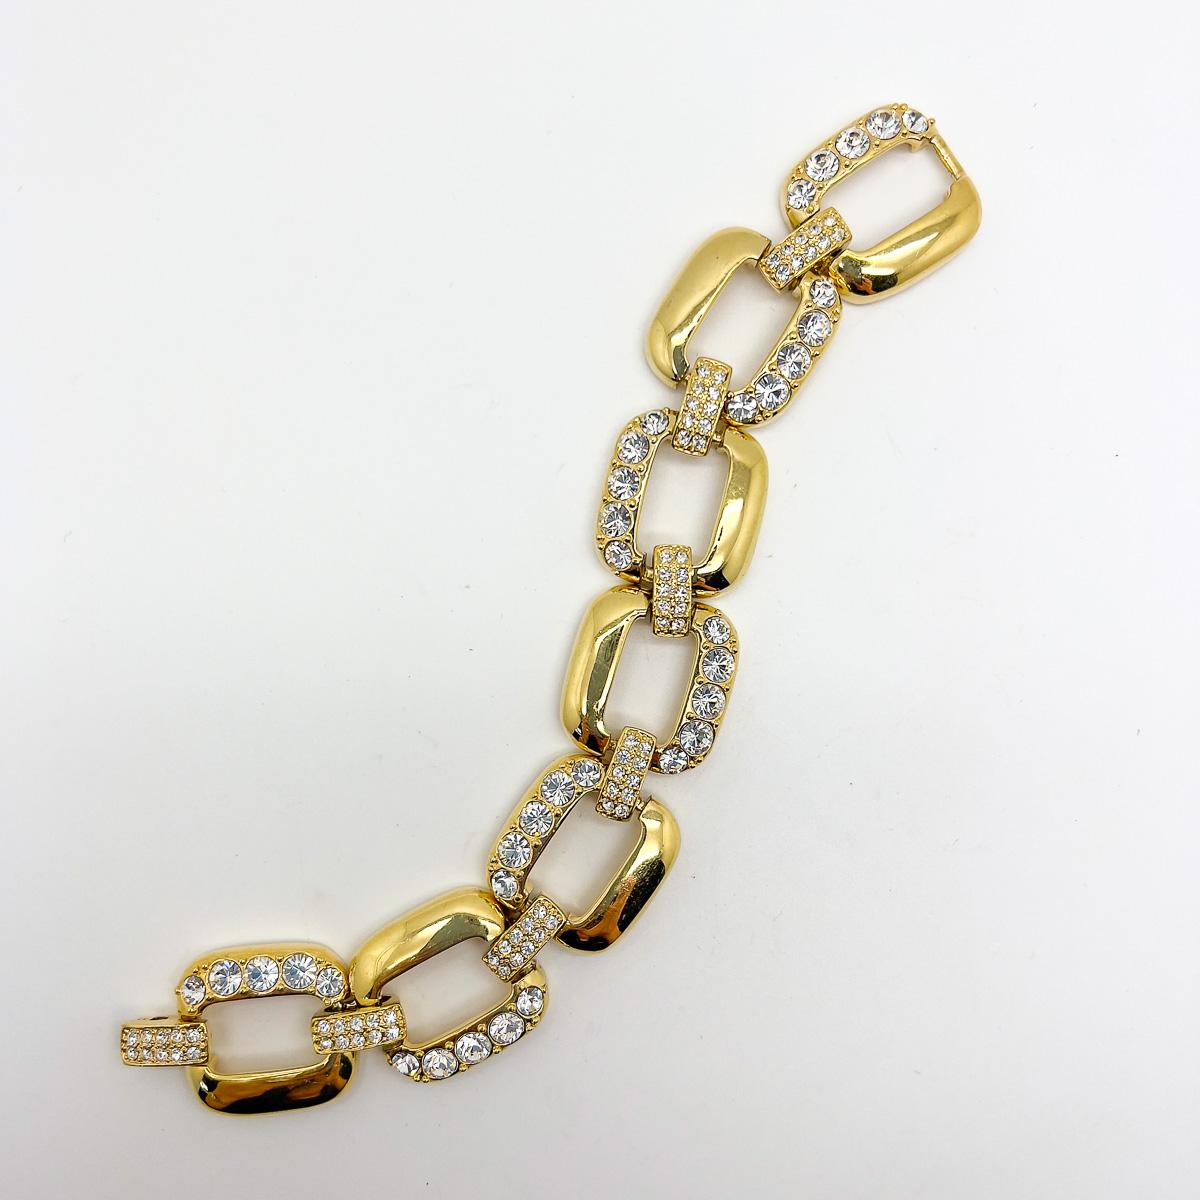 Vintage Chunky Link Crystal Bracelet 1990s In Good Condition For Sale In Wilmslow, GB